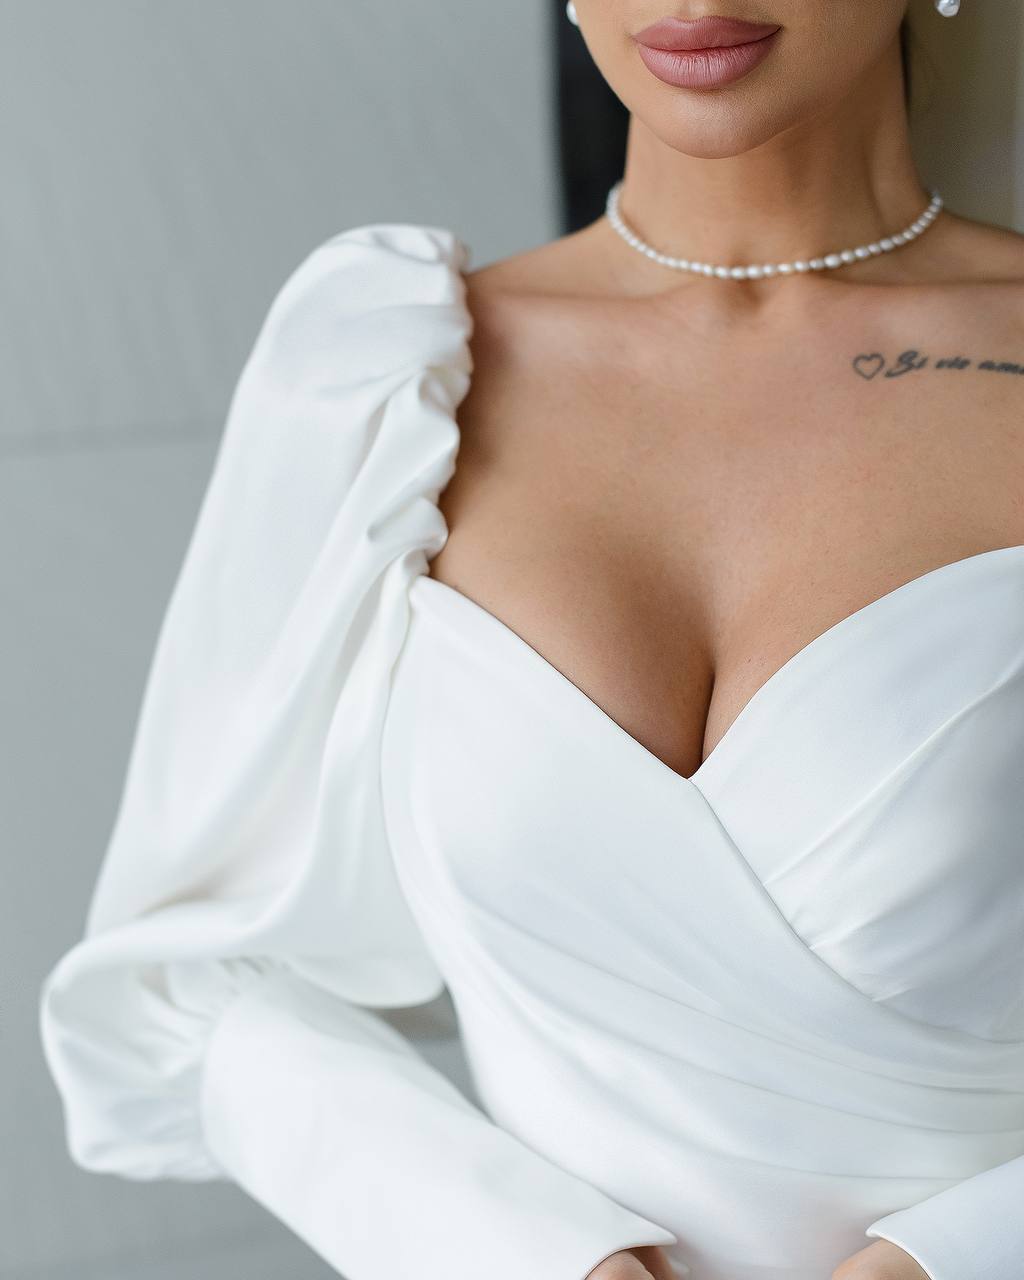 a woman in a white dress with a tattoo on her chest